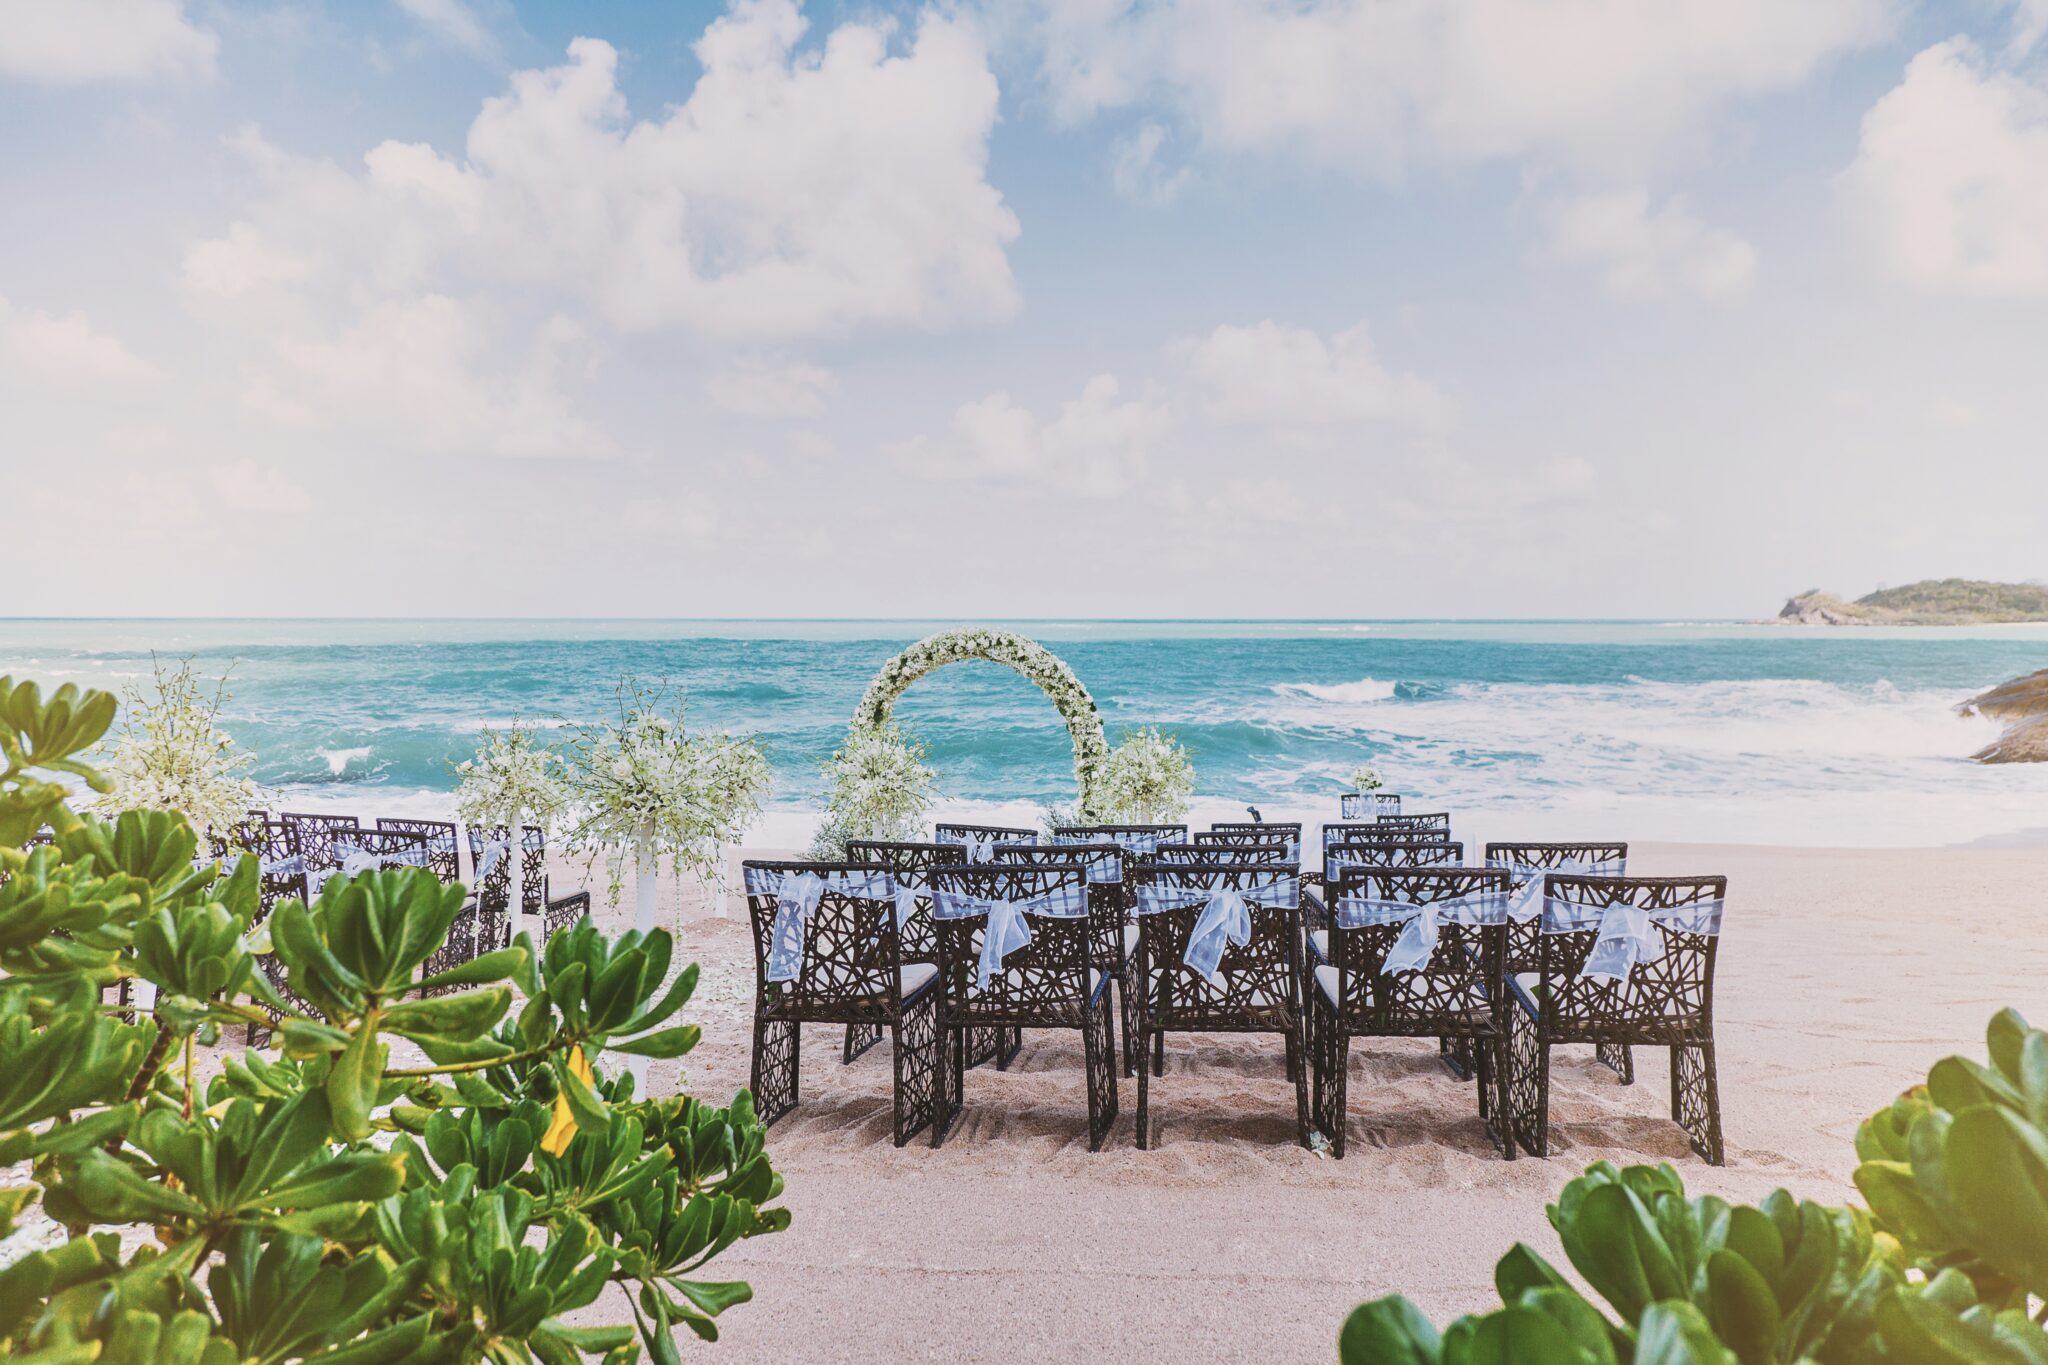 Wedding ceremony venue setting on the beach, white sand with panoramic ocean in background, tree in foreground, clear sky, flowers and floral decoration for arch, the roses petals on the aisle walk way.